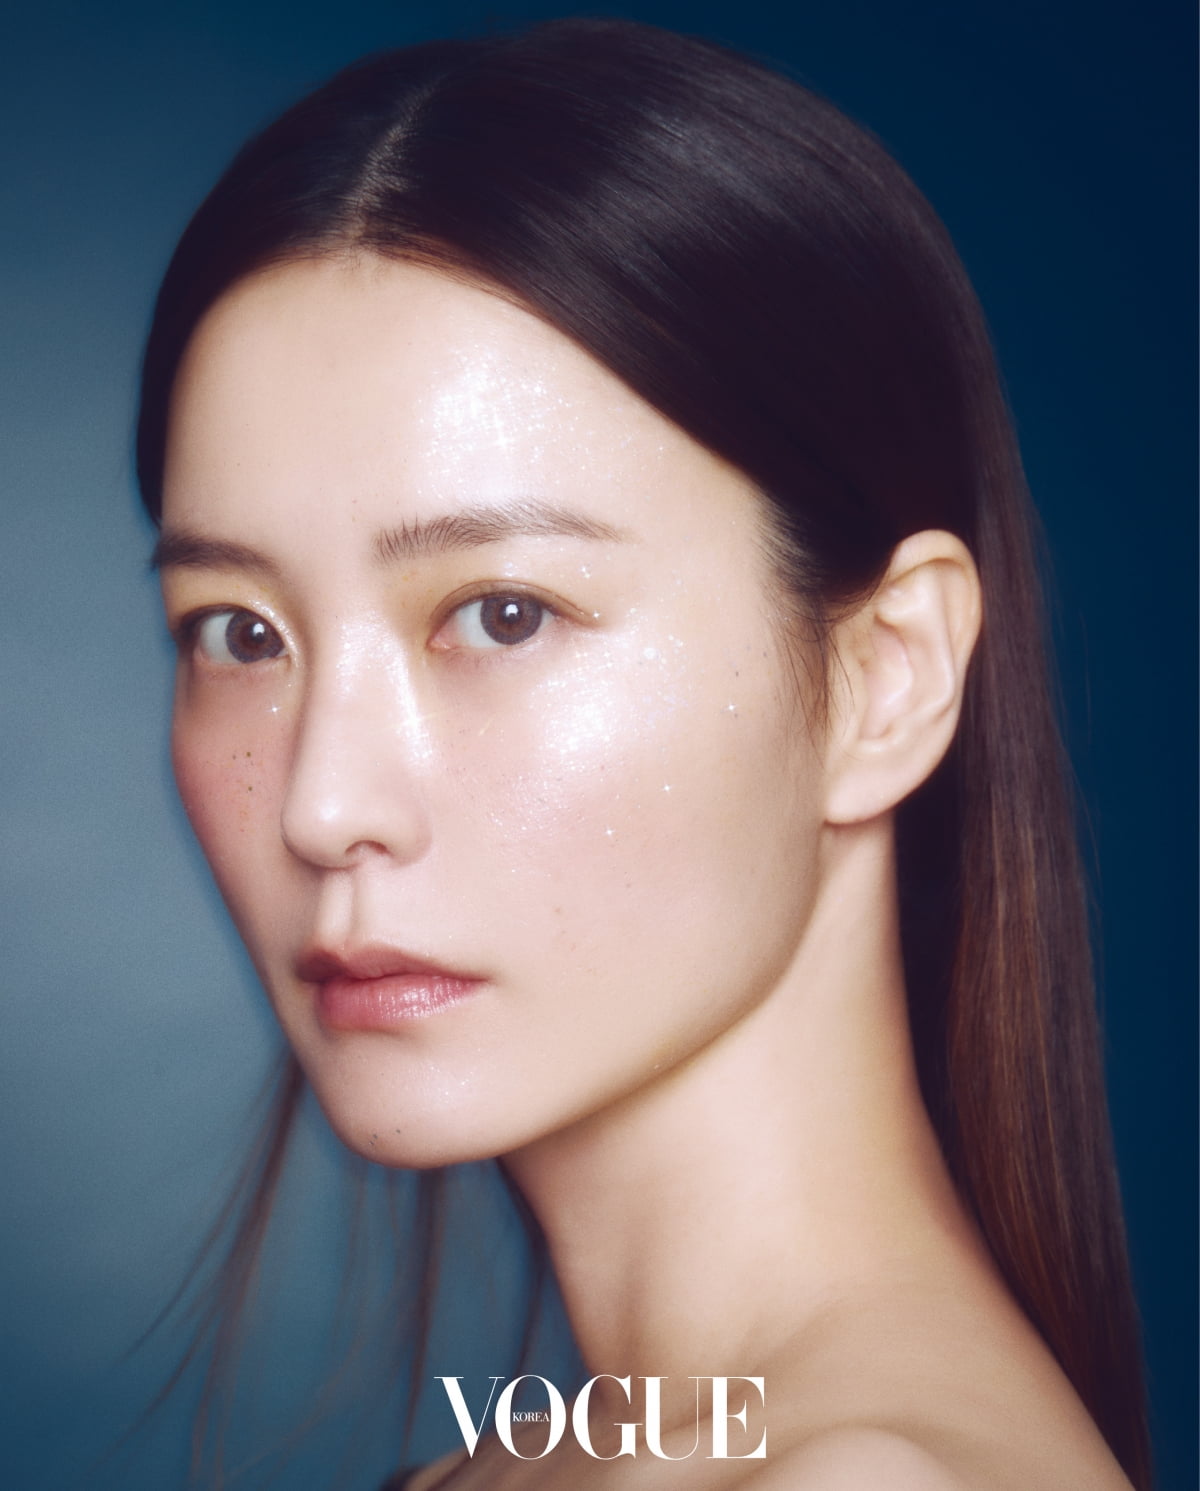 Jung Yu-mi is mysterious